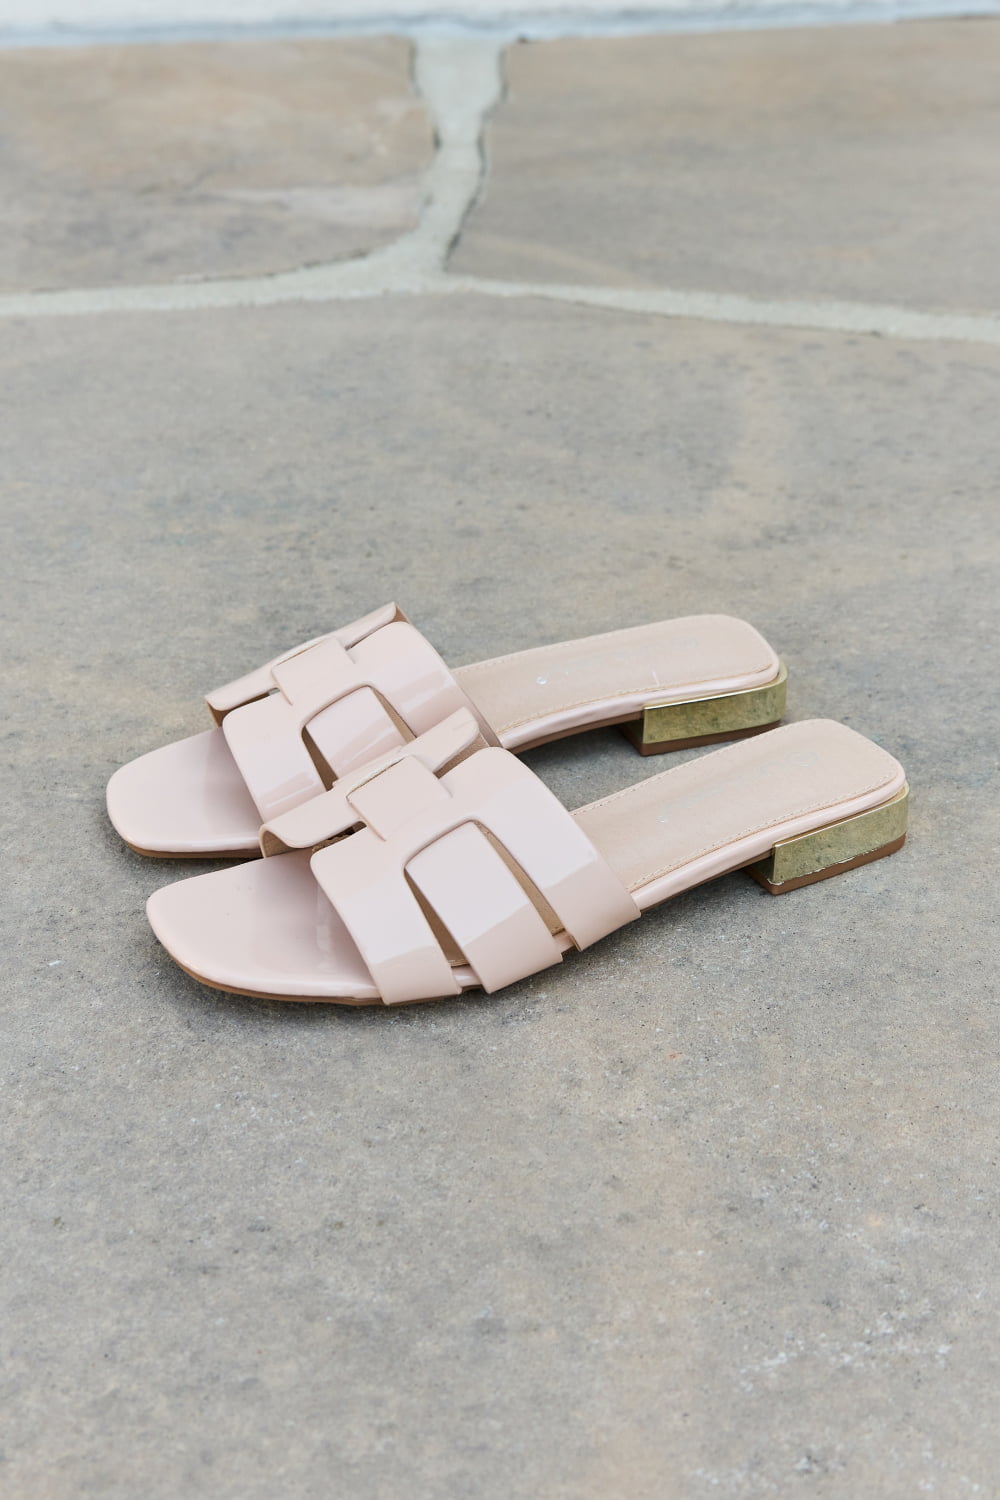 Weeboo Walk It Out Slide Sandals in Cream